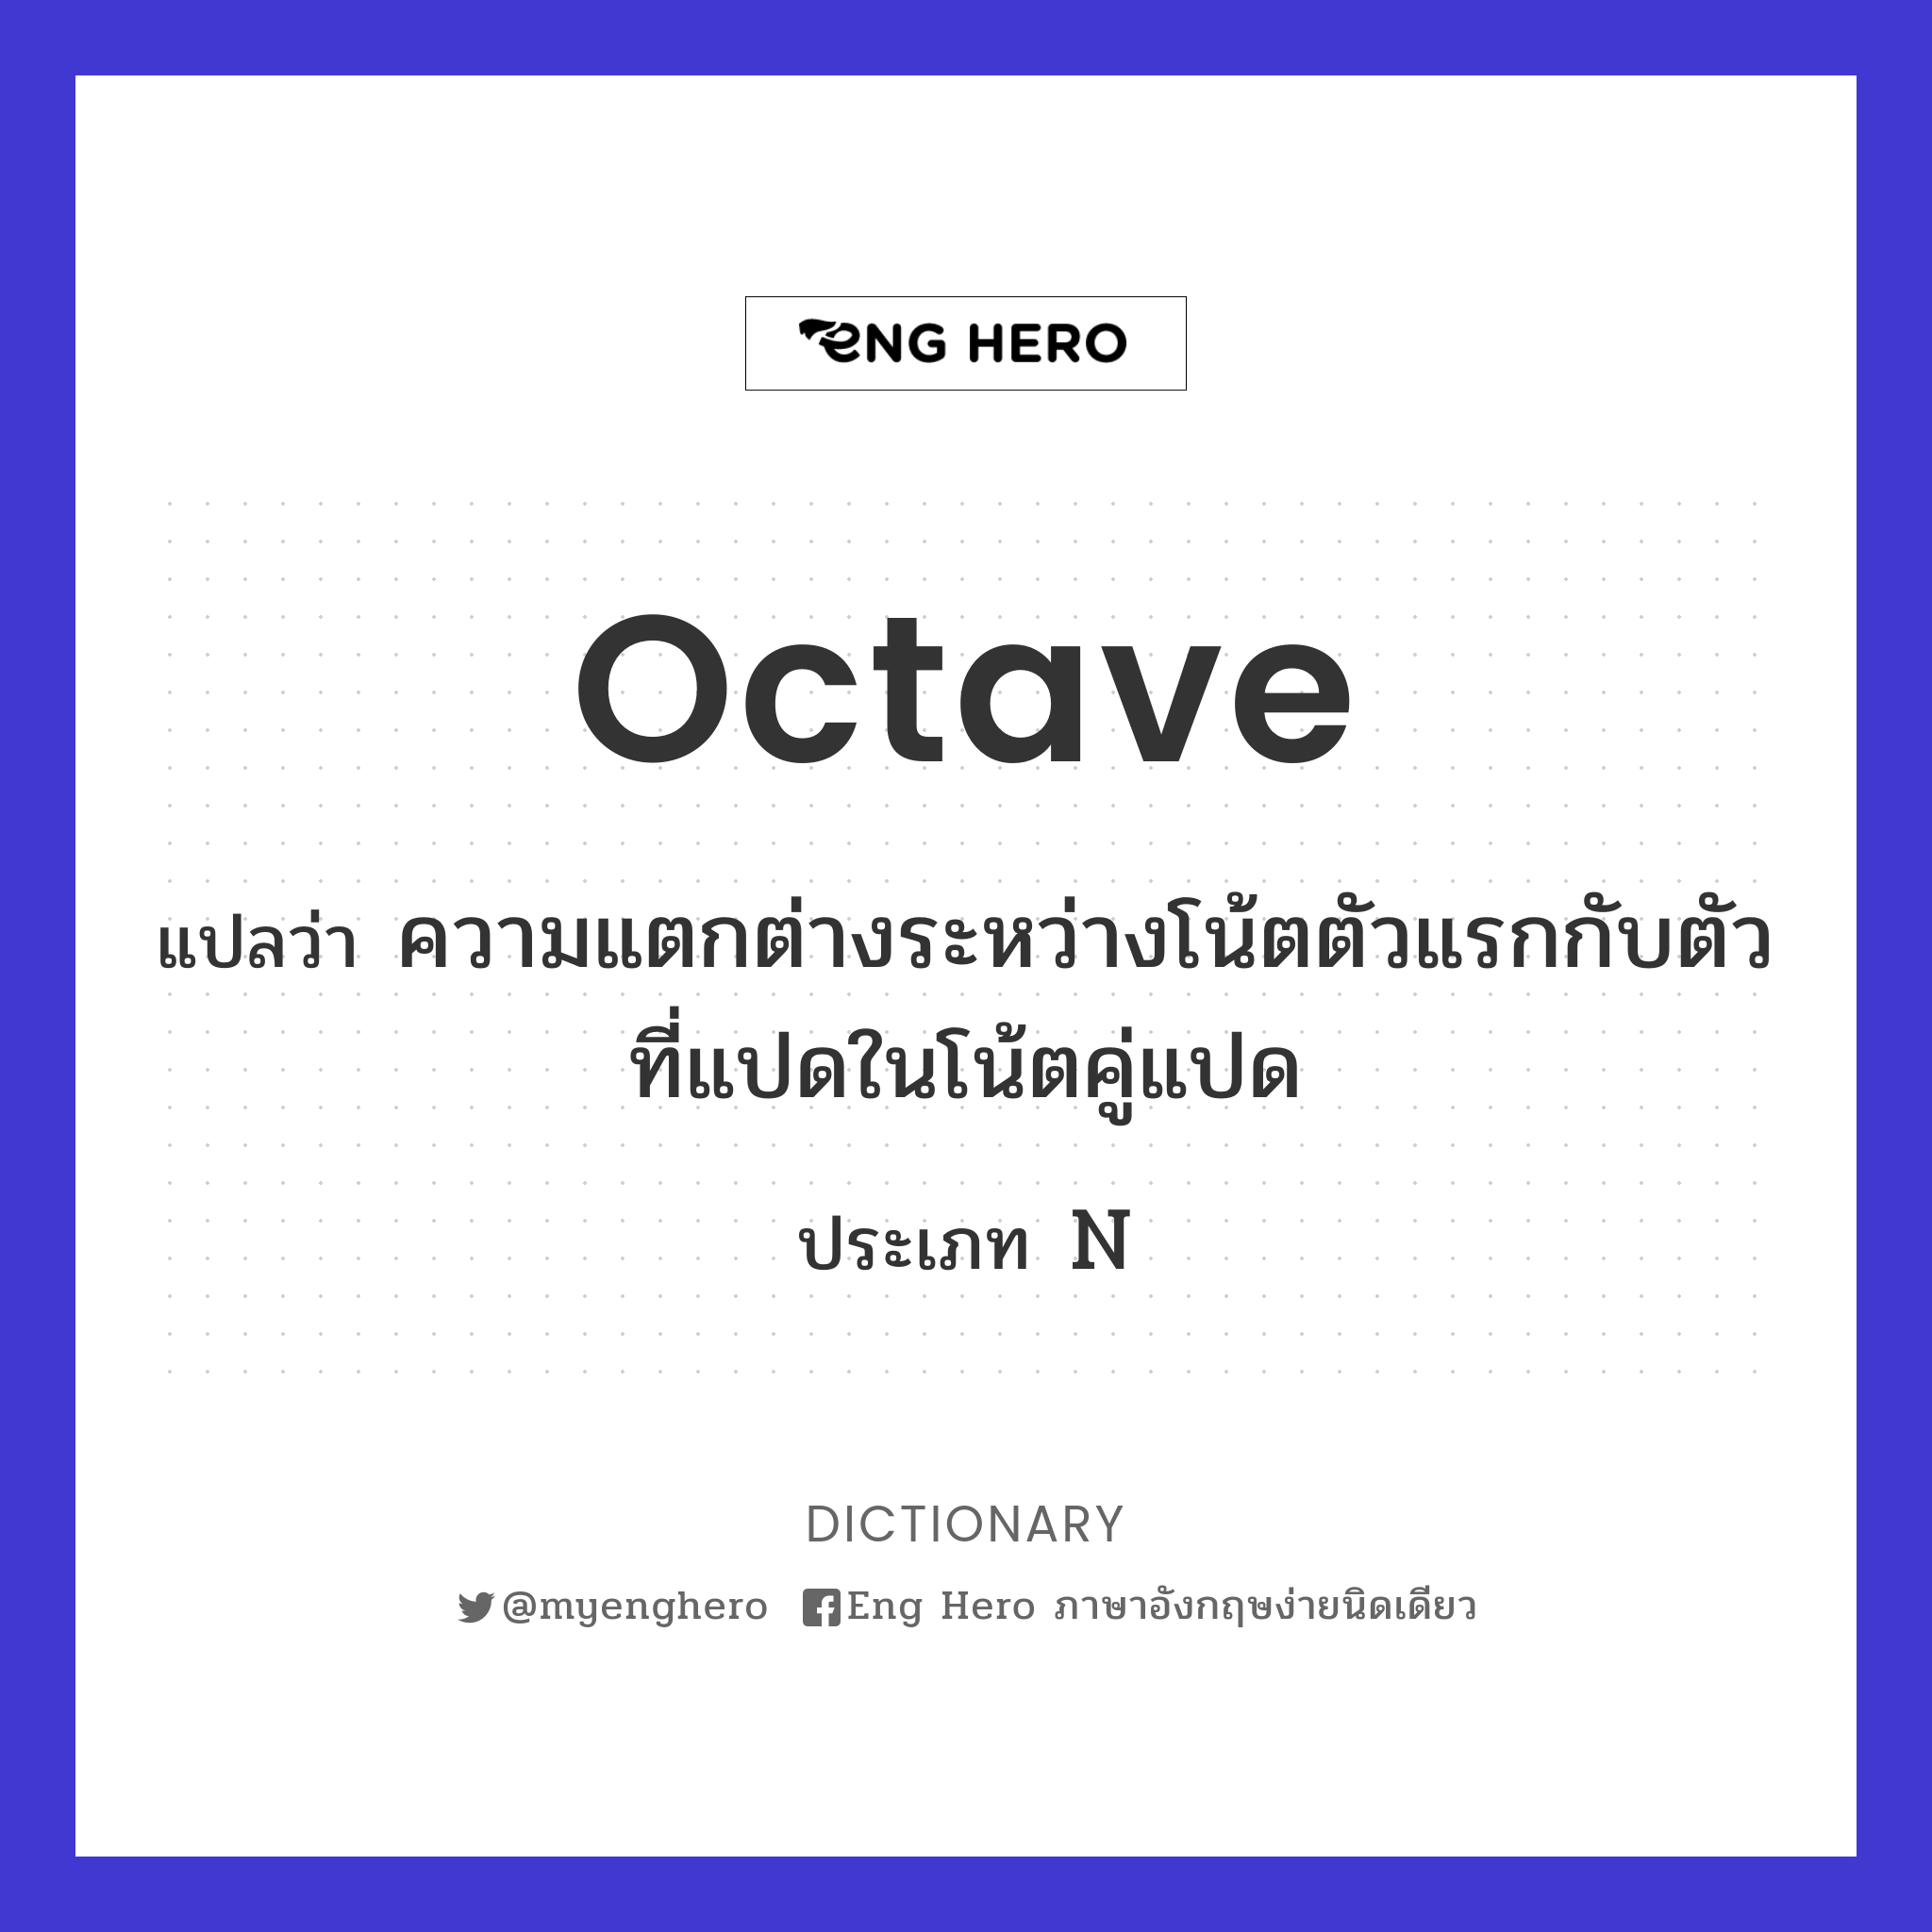 octave